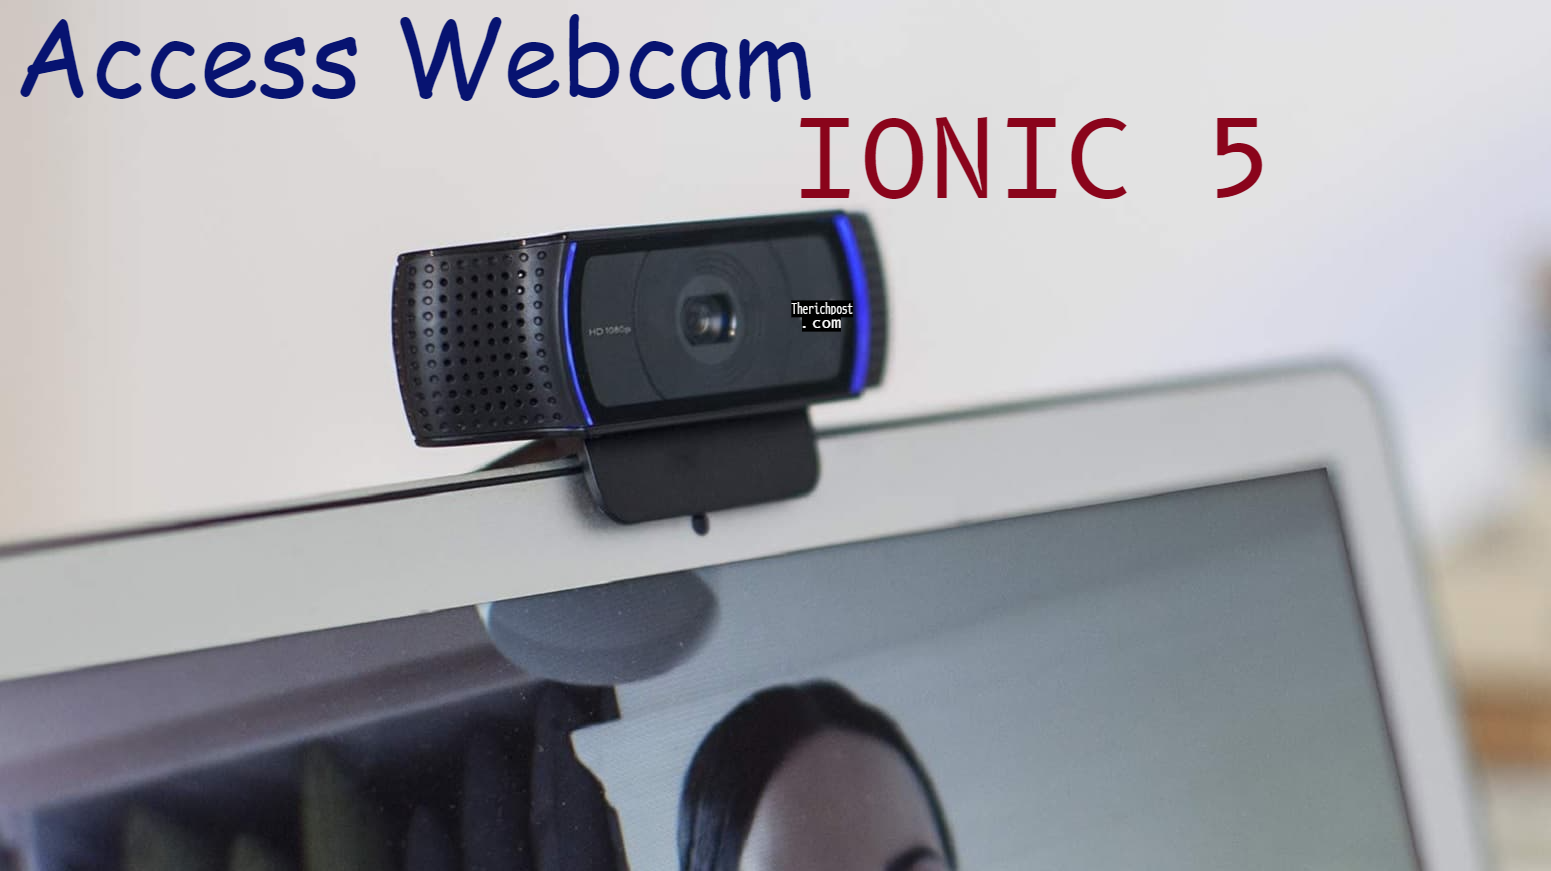 How to access webcam in Ionic 5?